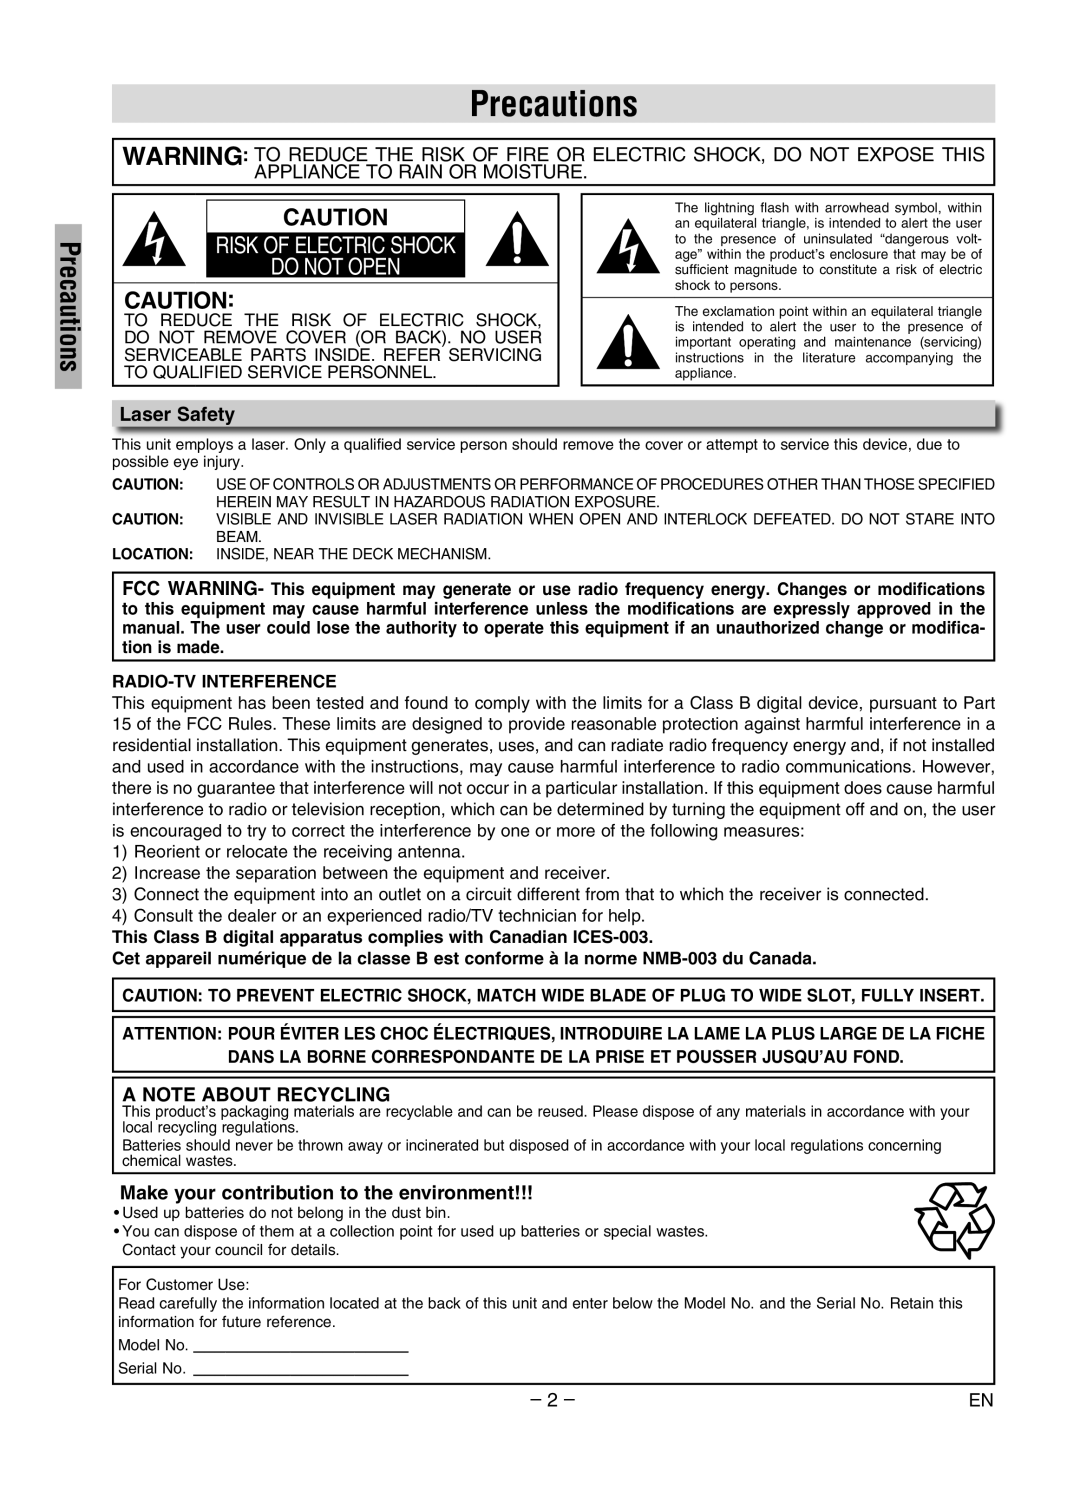 Magnavox MWD2206A owner manual Precautions, Laser Safety, A Note About Recycling, Make your contribution to the environment 